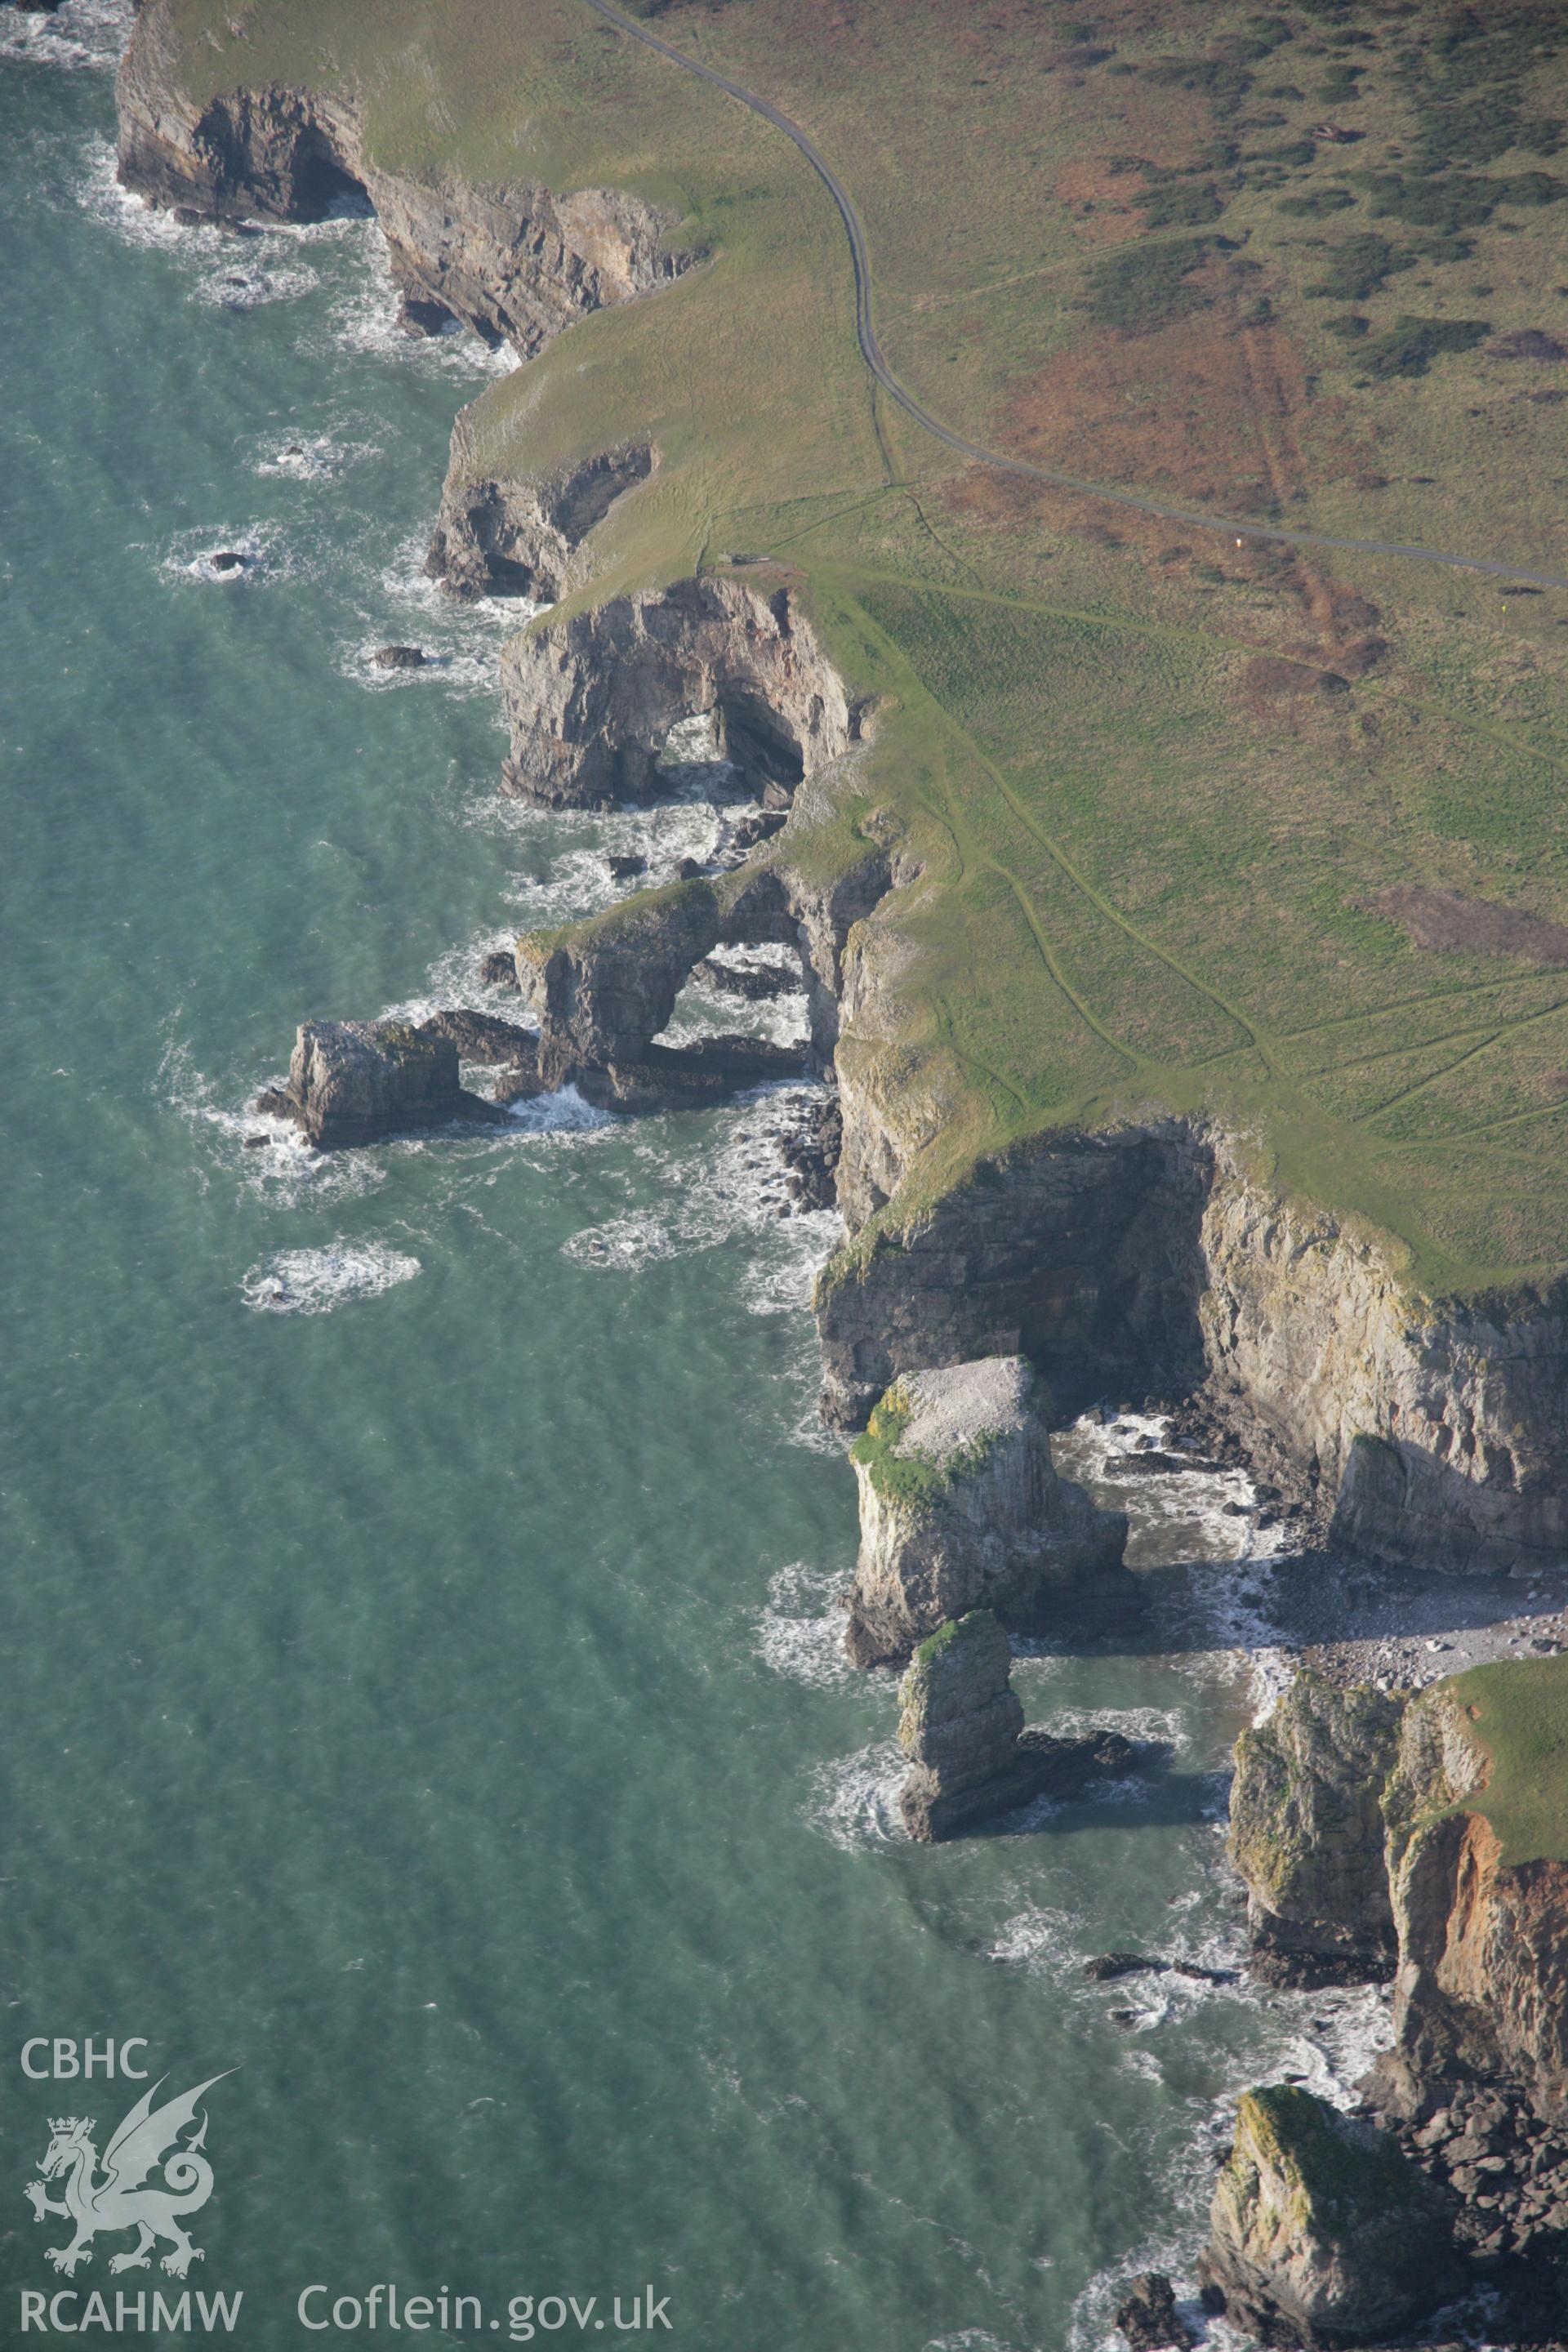 RCAHMW colour oblique aerial photograph of the Green Bridge (of Wales) and Elegug Stacks showing the coastal landscape from the east. Taken on 19 November 2005 by Toby Driver